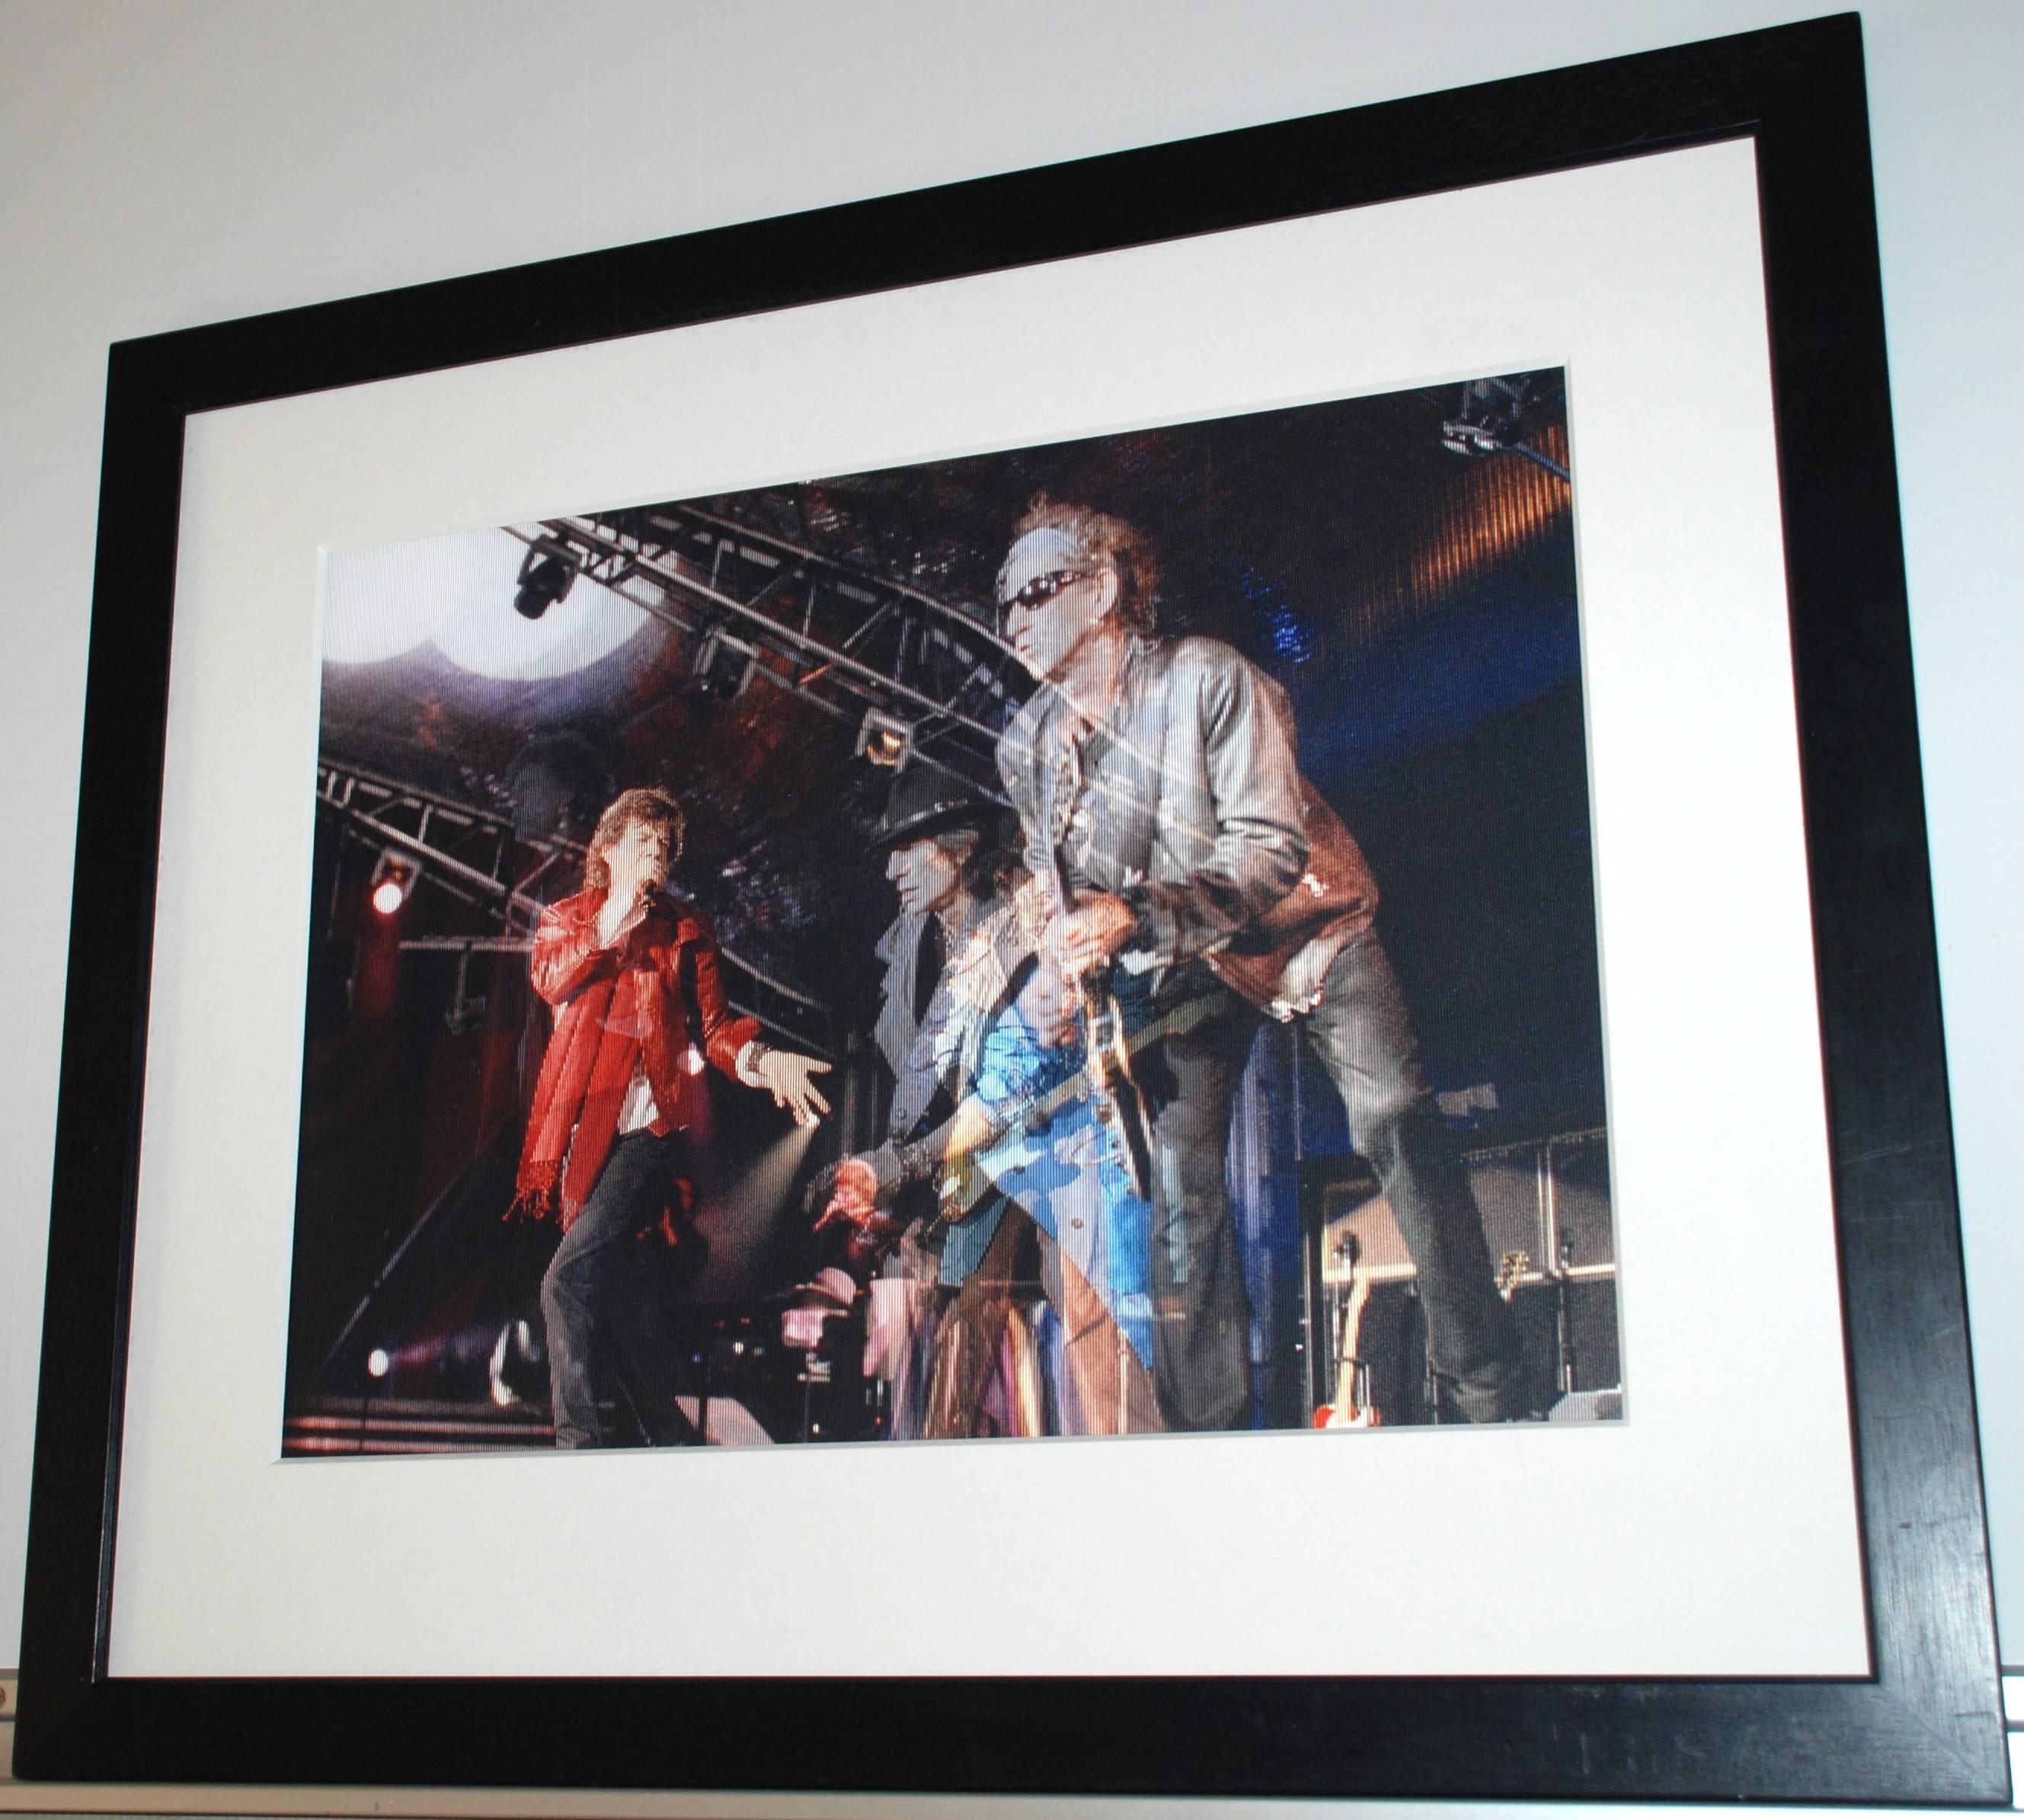 Rolling Stones Lenticular Photograph - Black Color Photograph by Jay Blakesberg